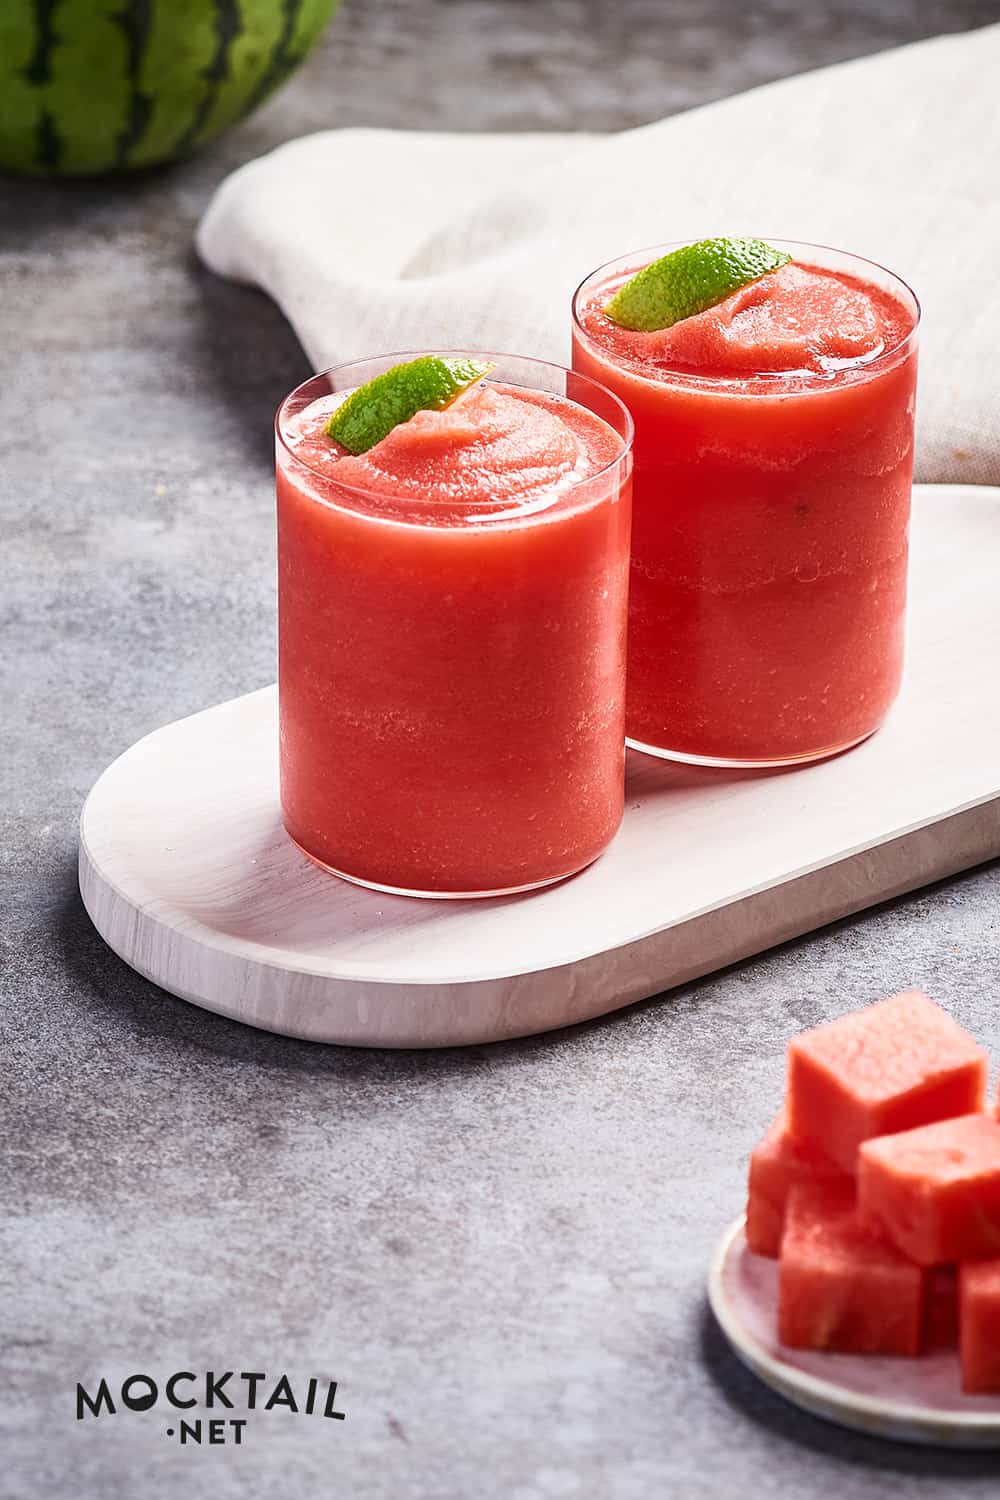 Ingredients for a Watermelon Smoothie